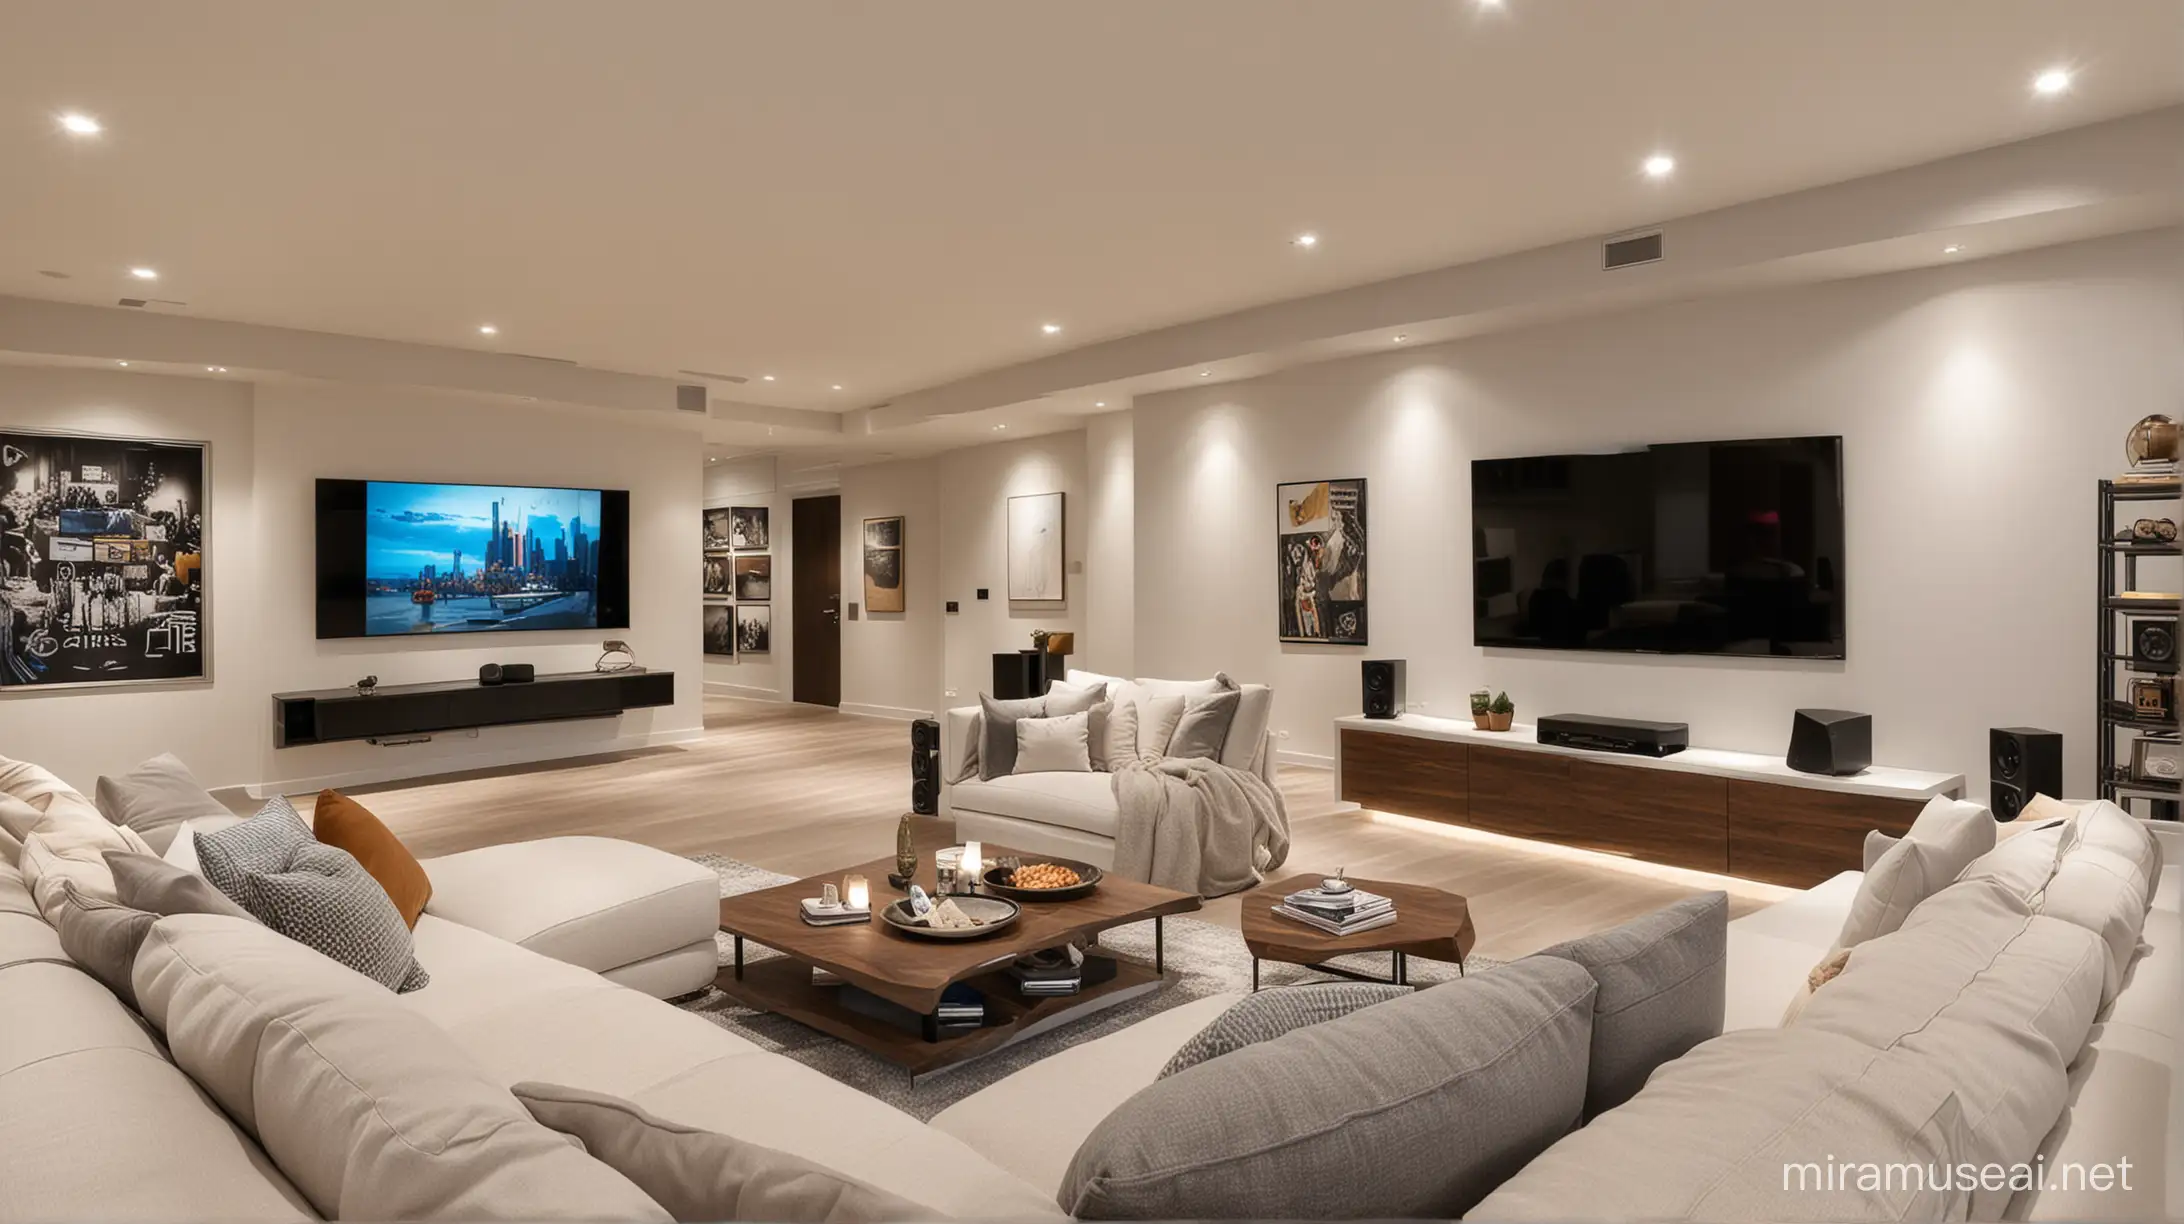 The trendy living area features a home theatre with a television screen and speakers